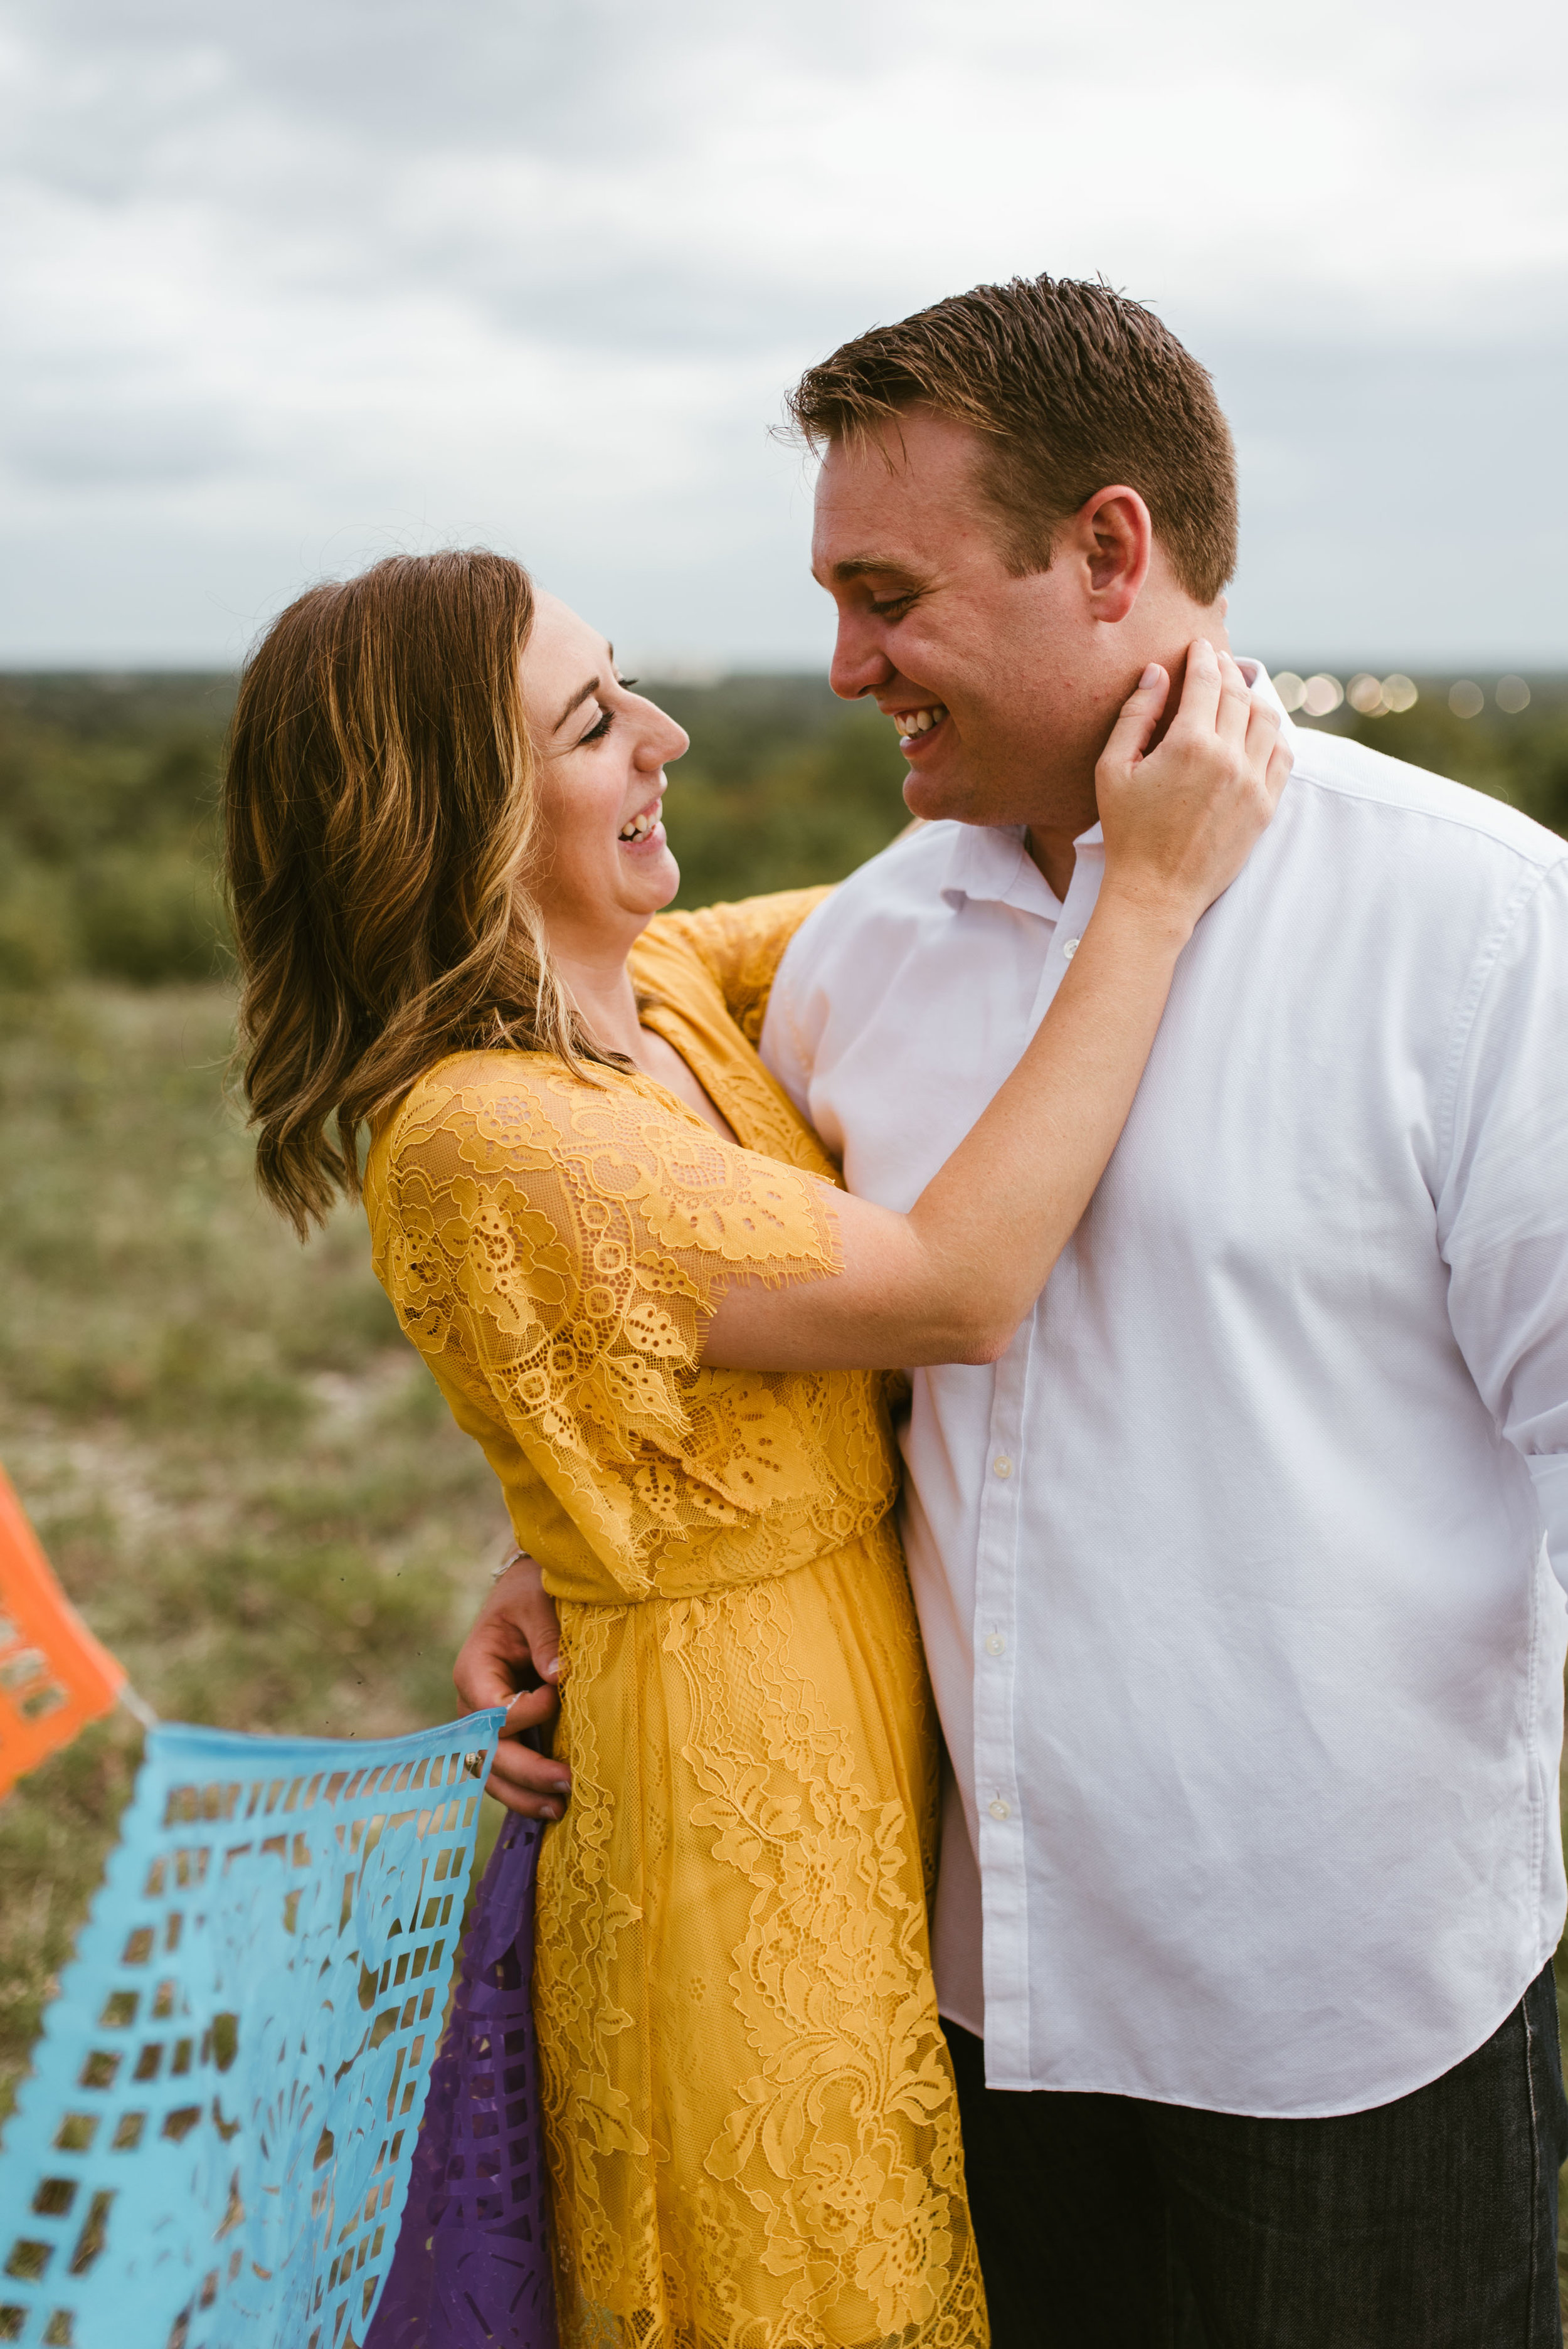  Fort Worth Engagement Session | Laura+Tyler | Fort Worth Engagement Photographer | www.jordanmitchellphotography.com 